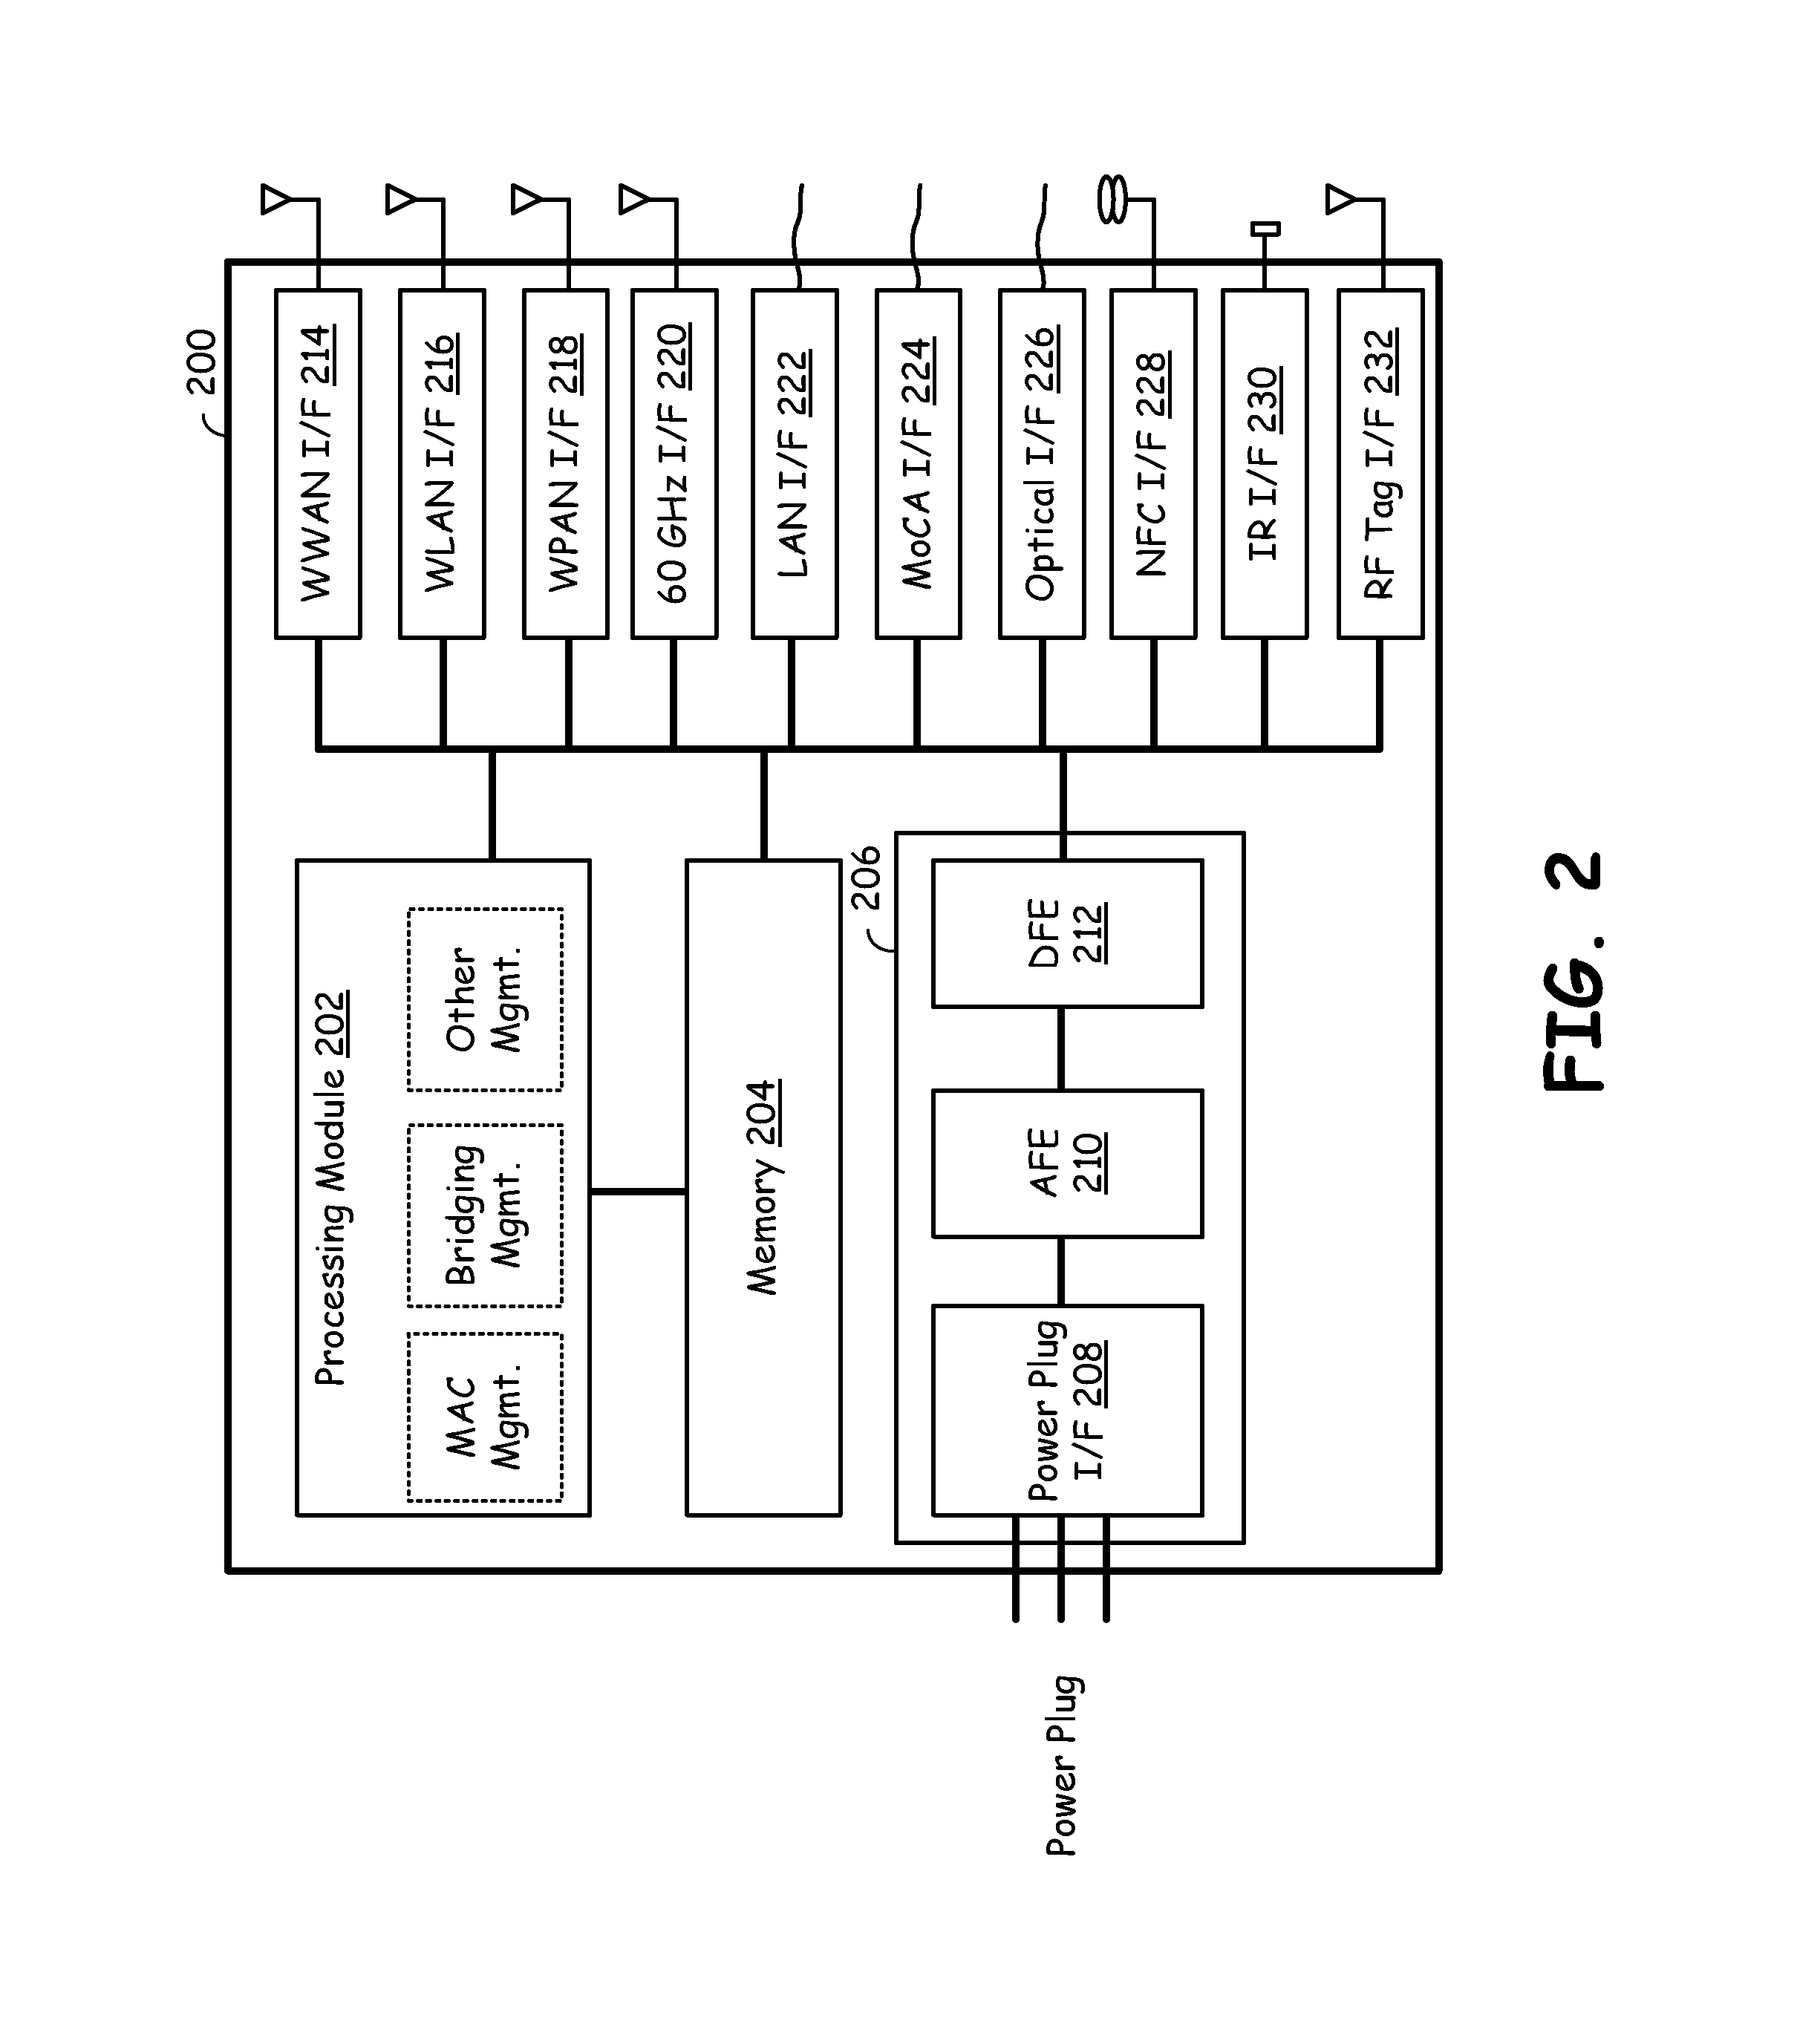 Powerline communication device with adaptable interface